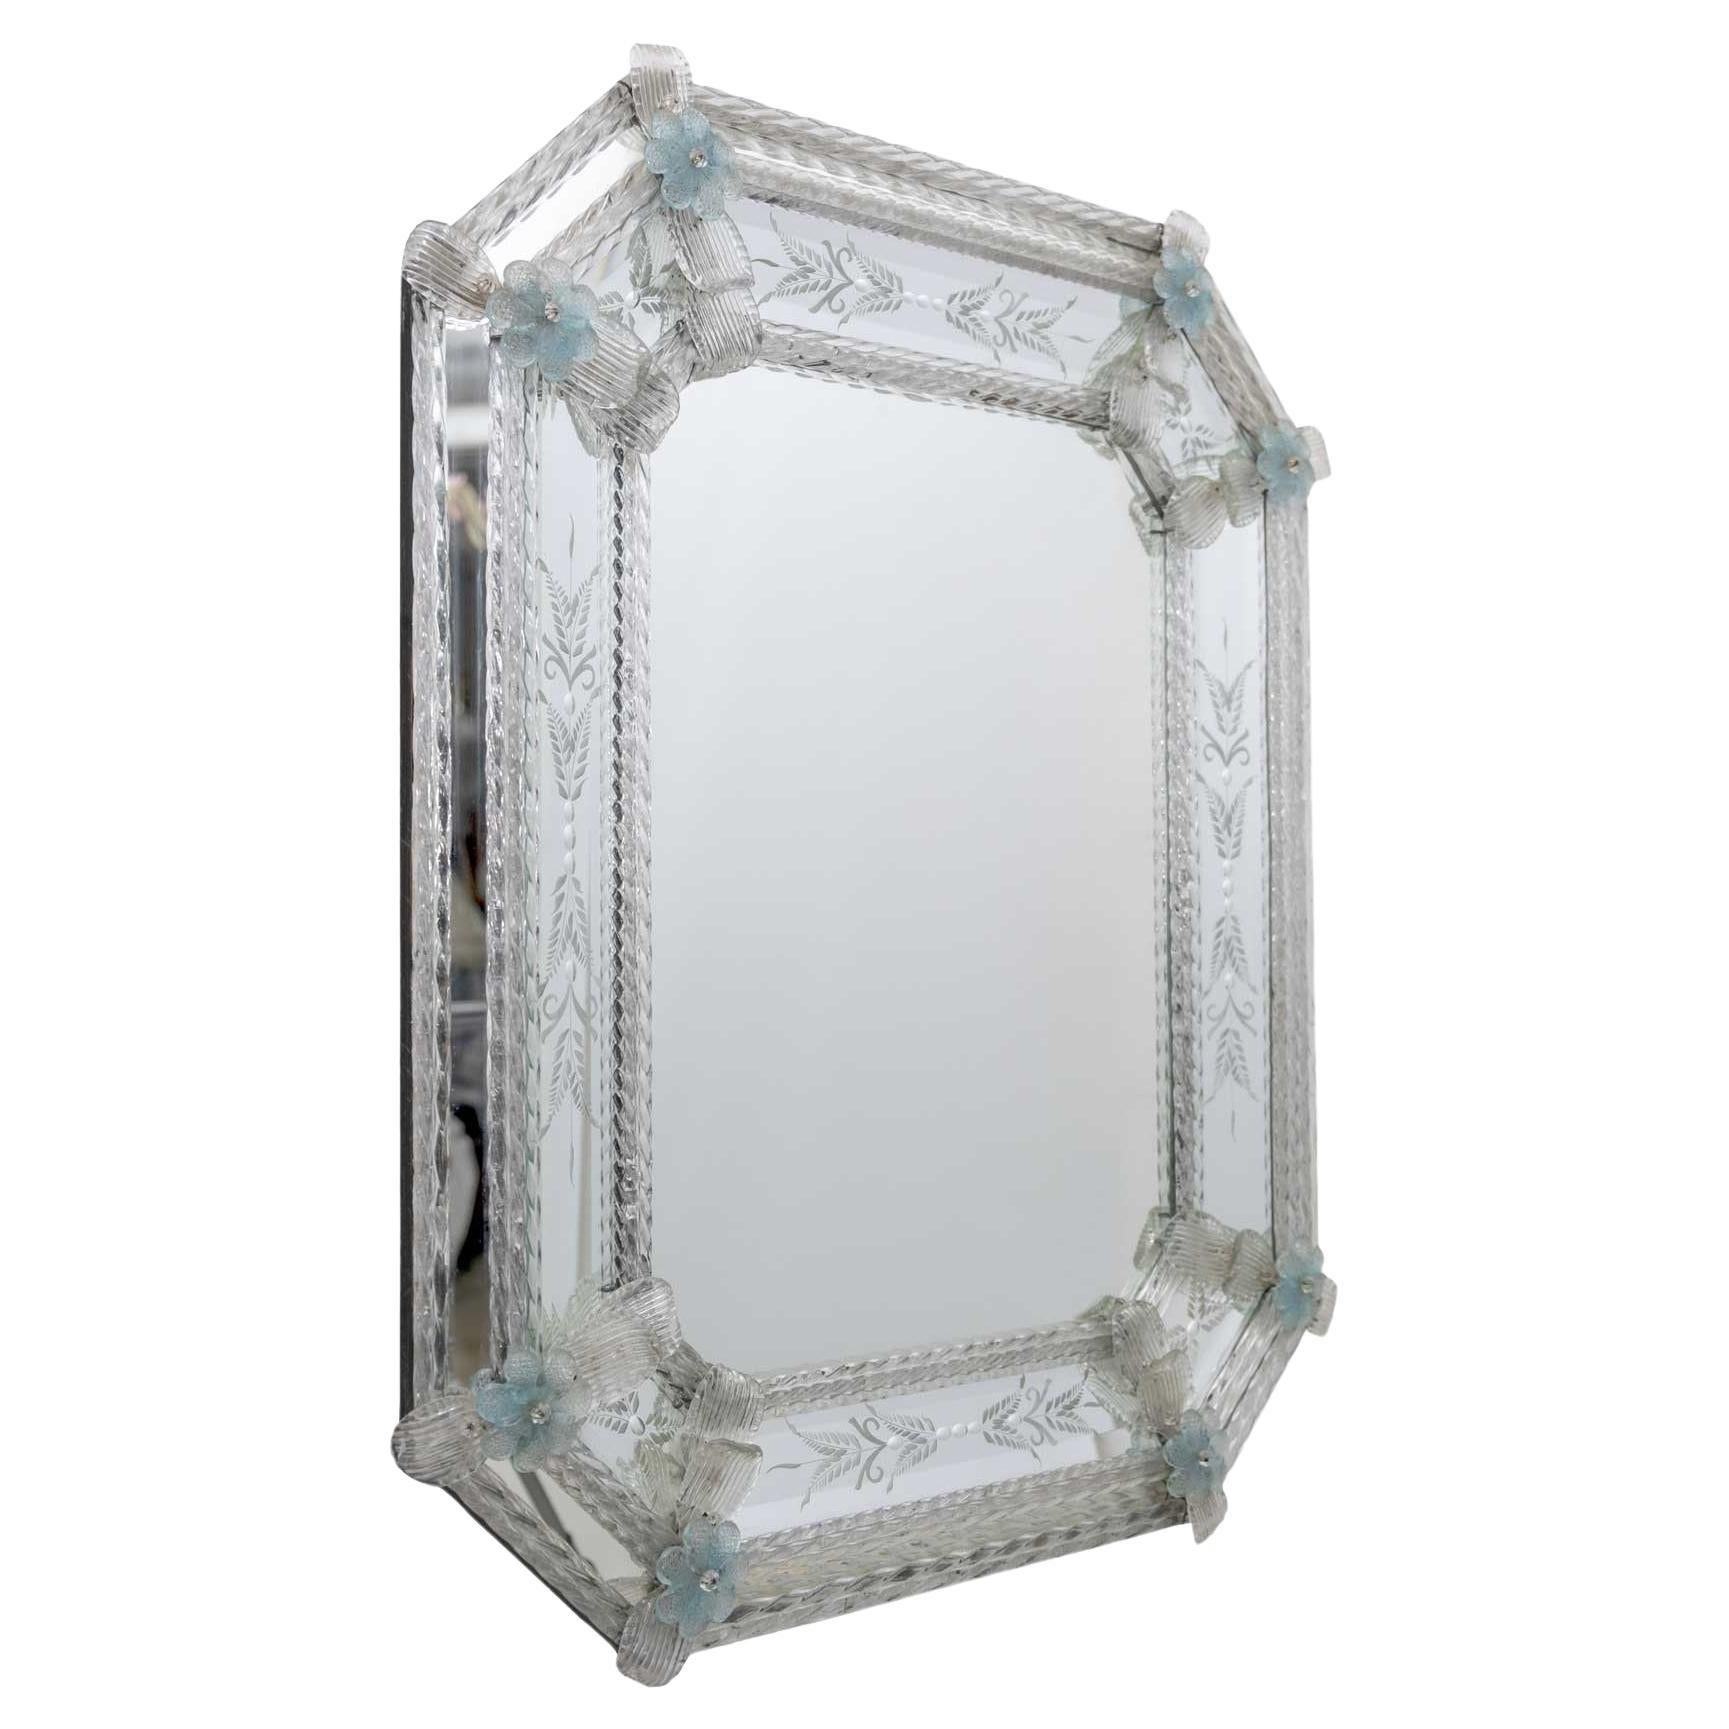 It is a delightful classic Venetian mirror with a frame formed by rods and crystal curls, the engravings that adorn this luxurious mirror have been completely handmade, and the finishes composed of small light blue flowers and blown glass leaves